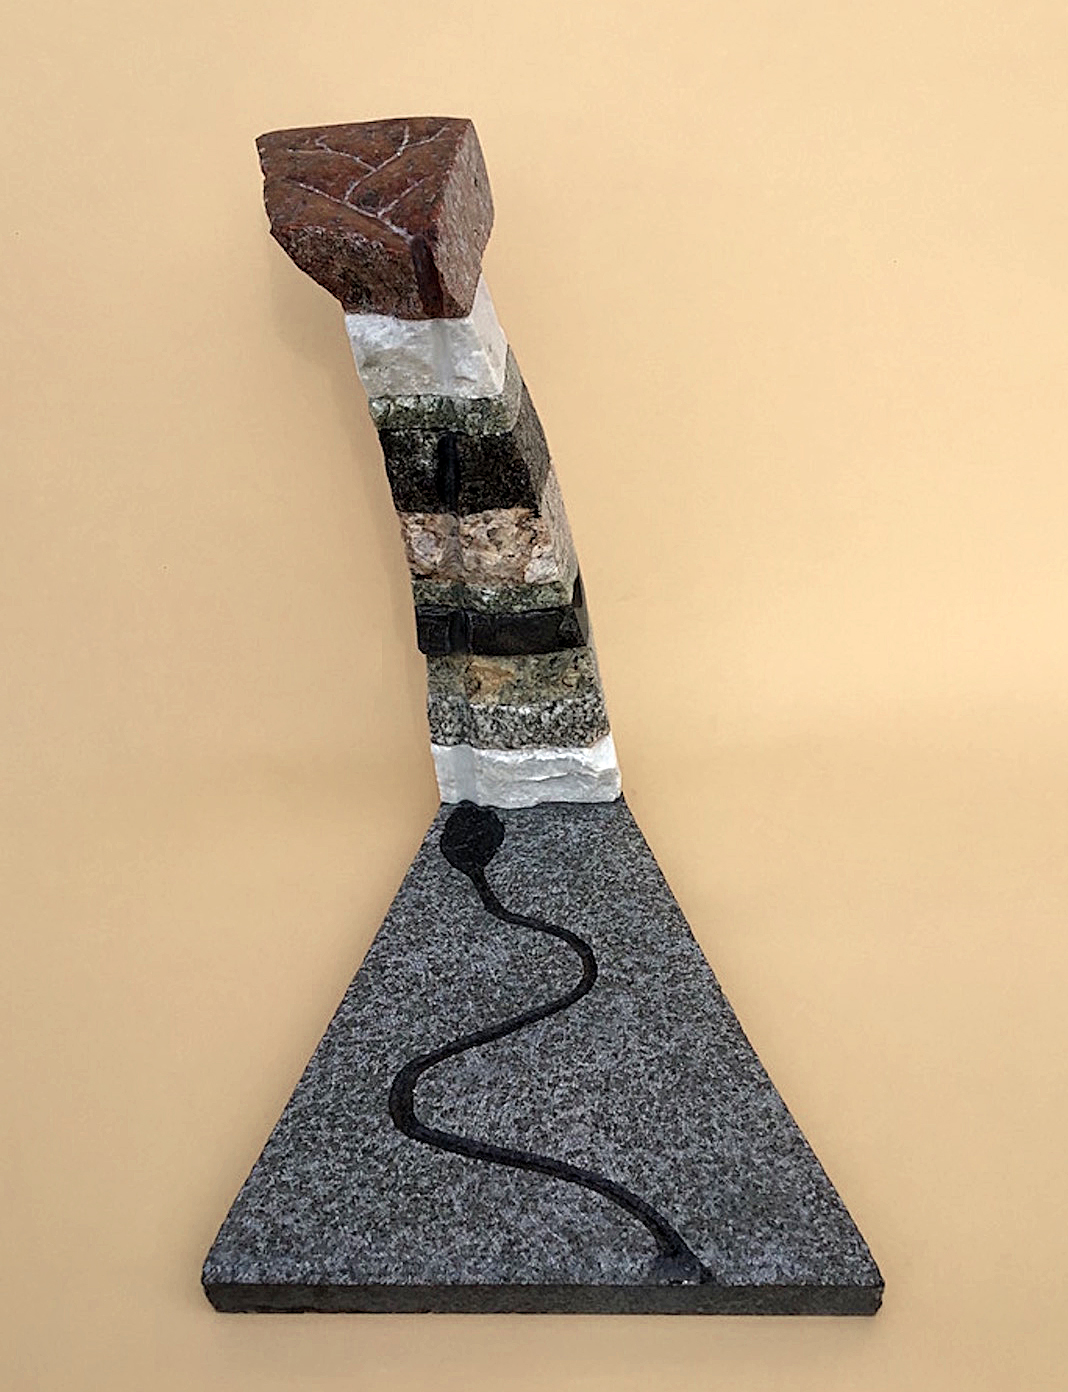 Time, mixed stone 2019  Kirk McLean